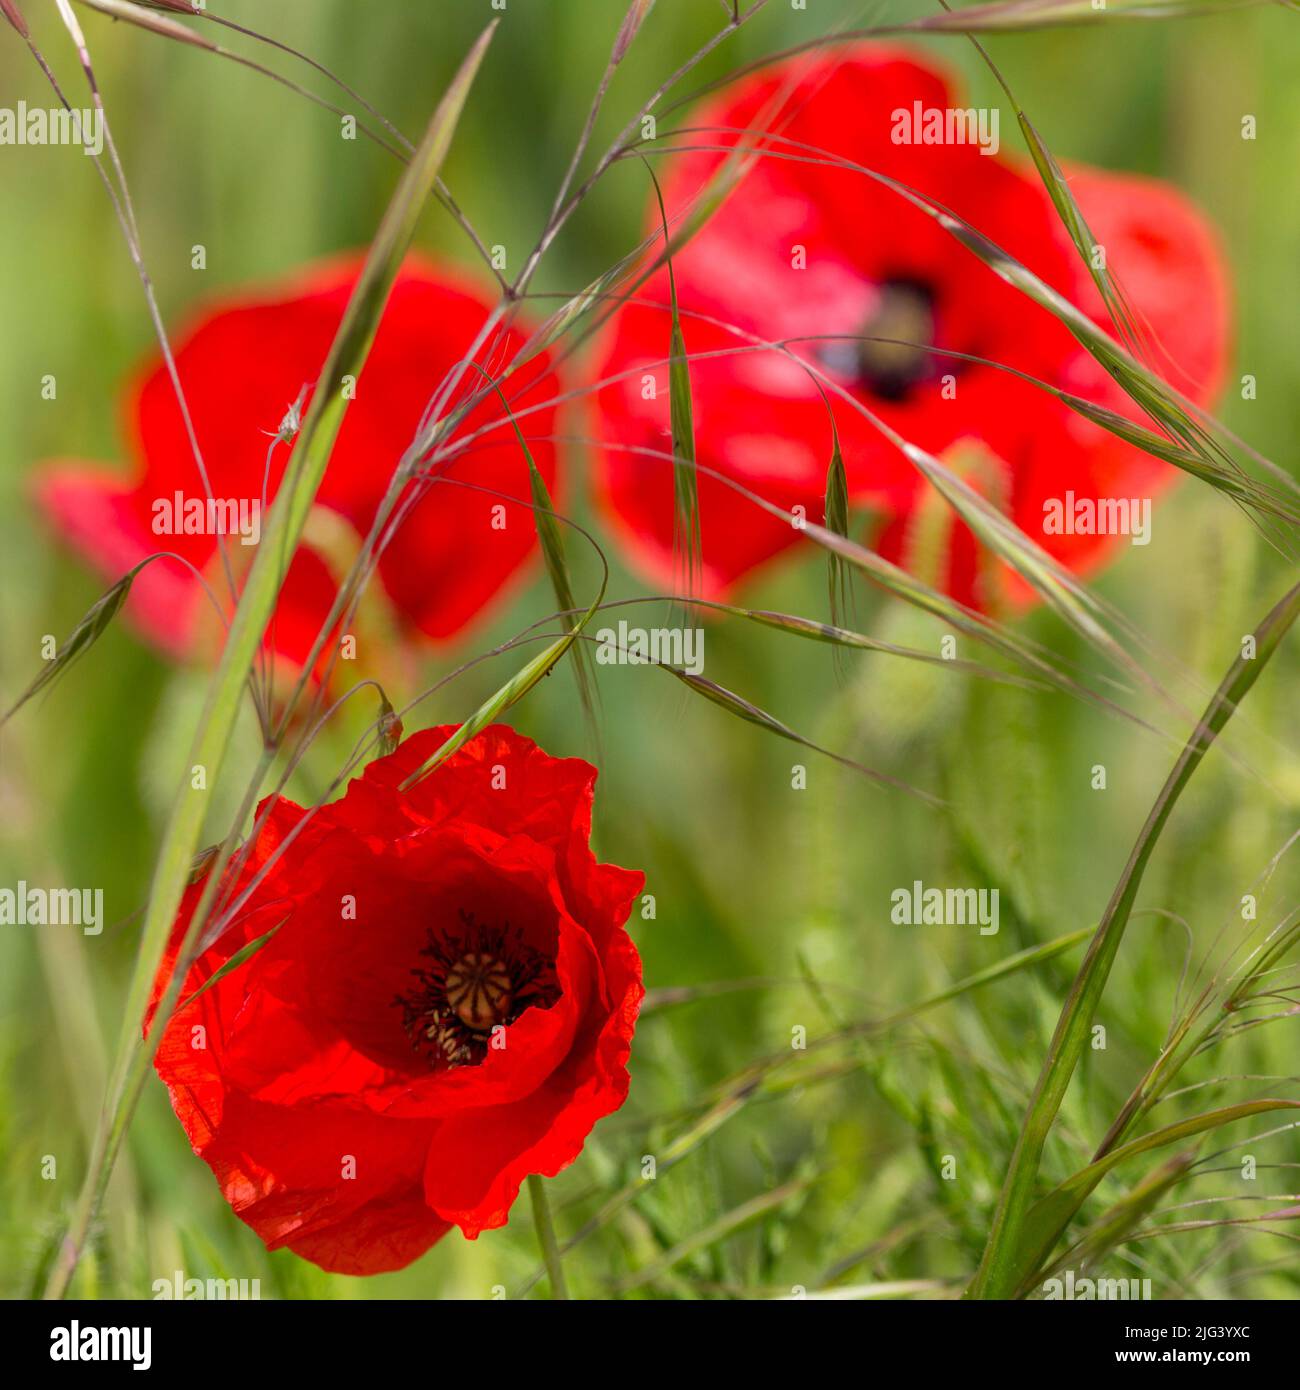 Common poppy four papery scarlet petals on hairy annual wild plant branched leaves likes arable land and disturbed ground image in square format Stock Photo